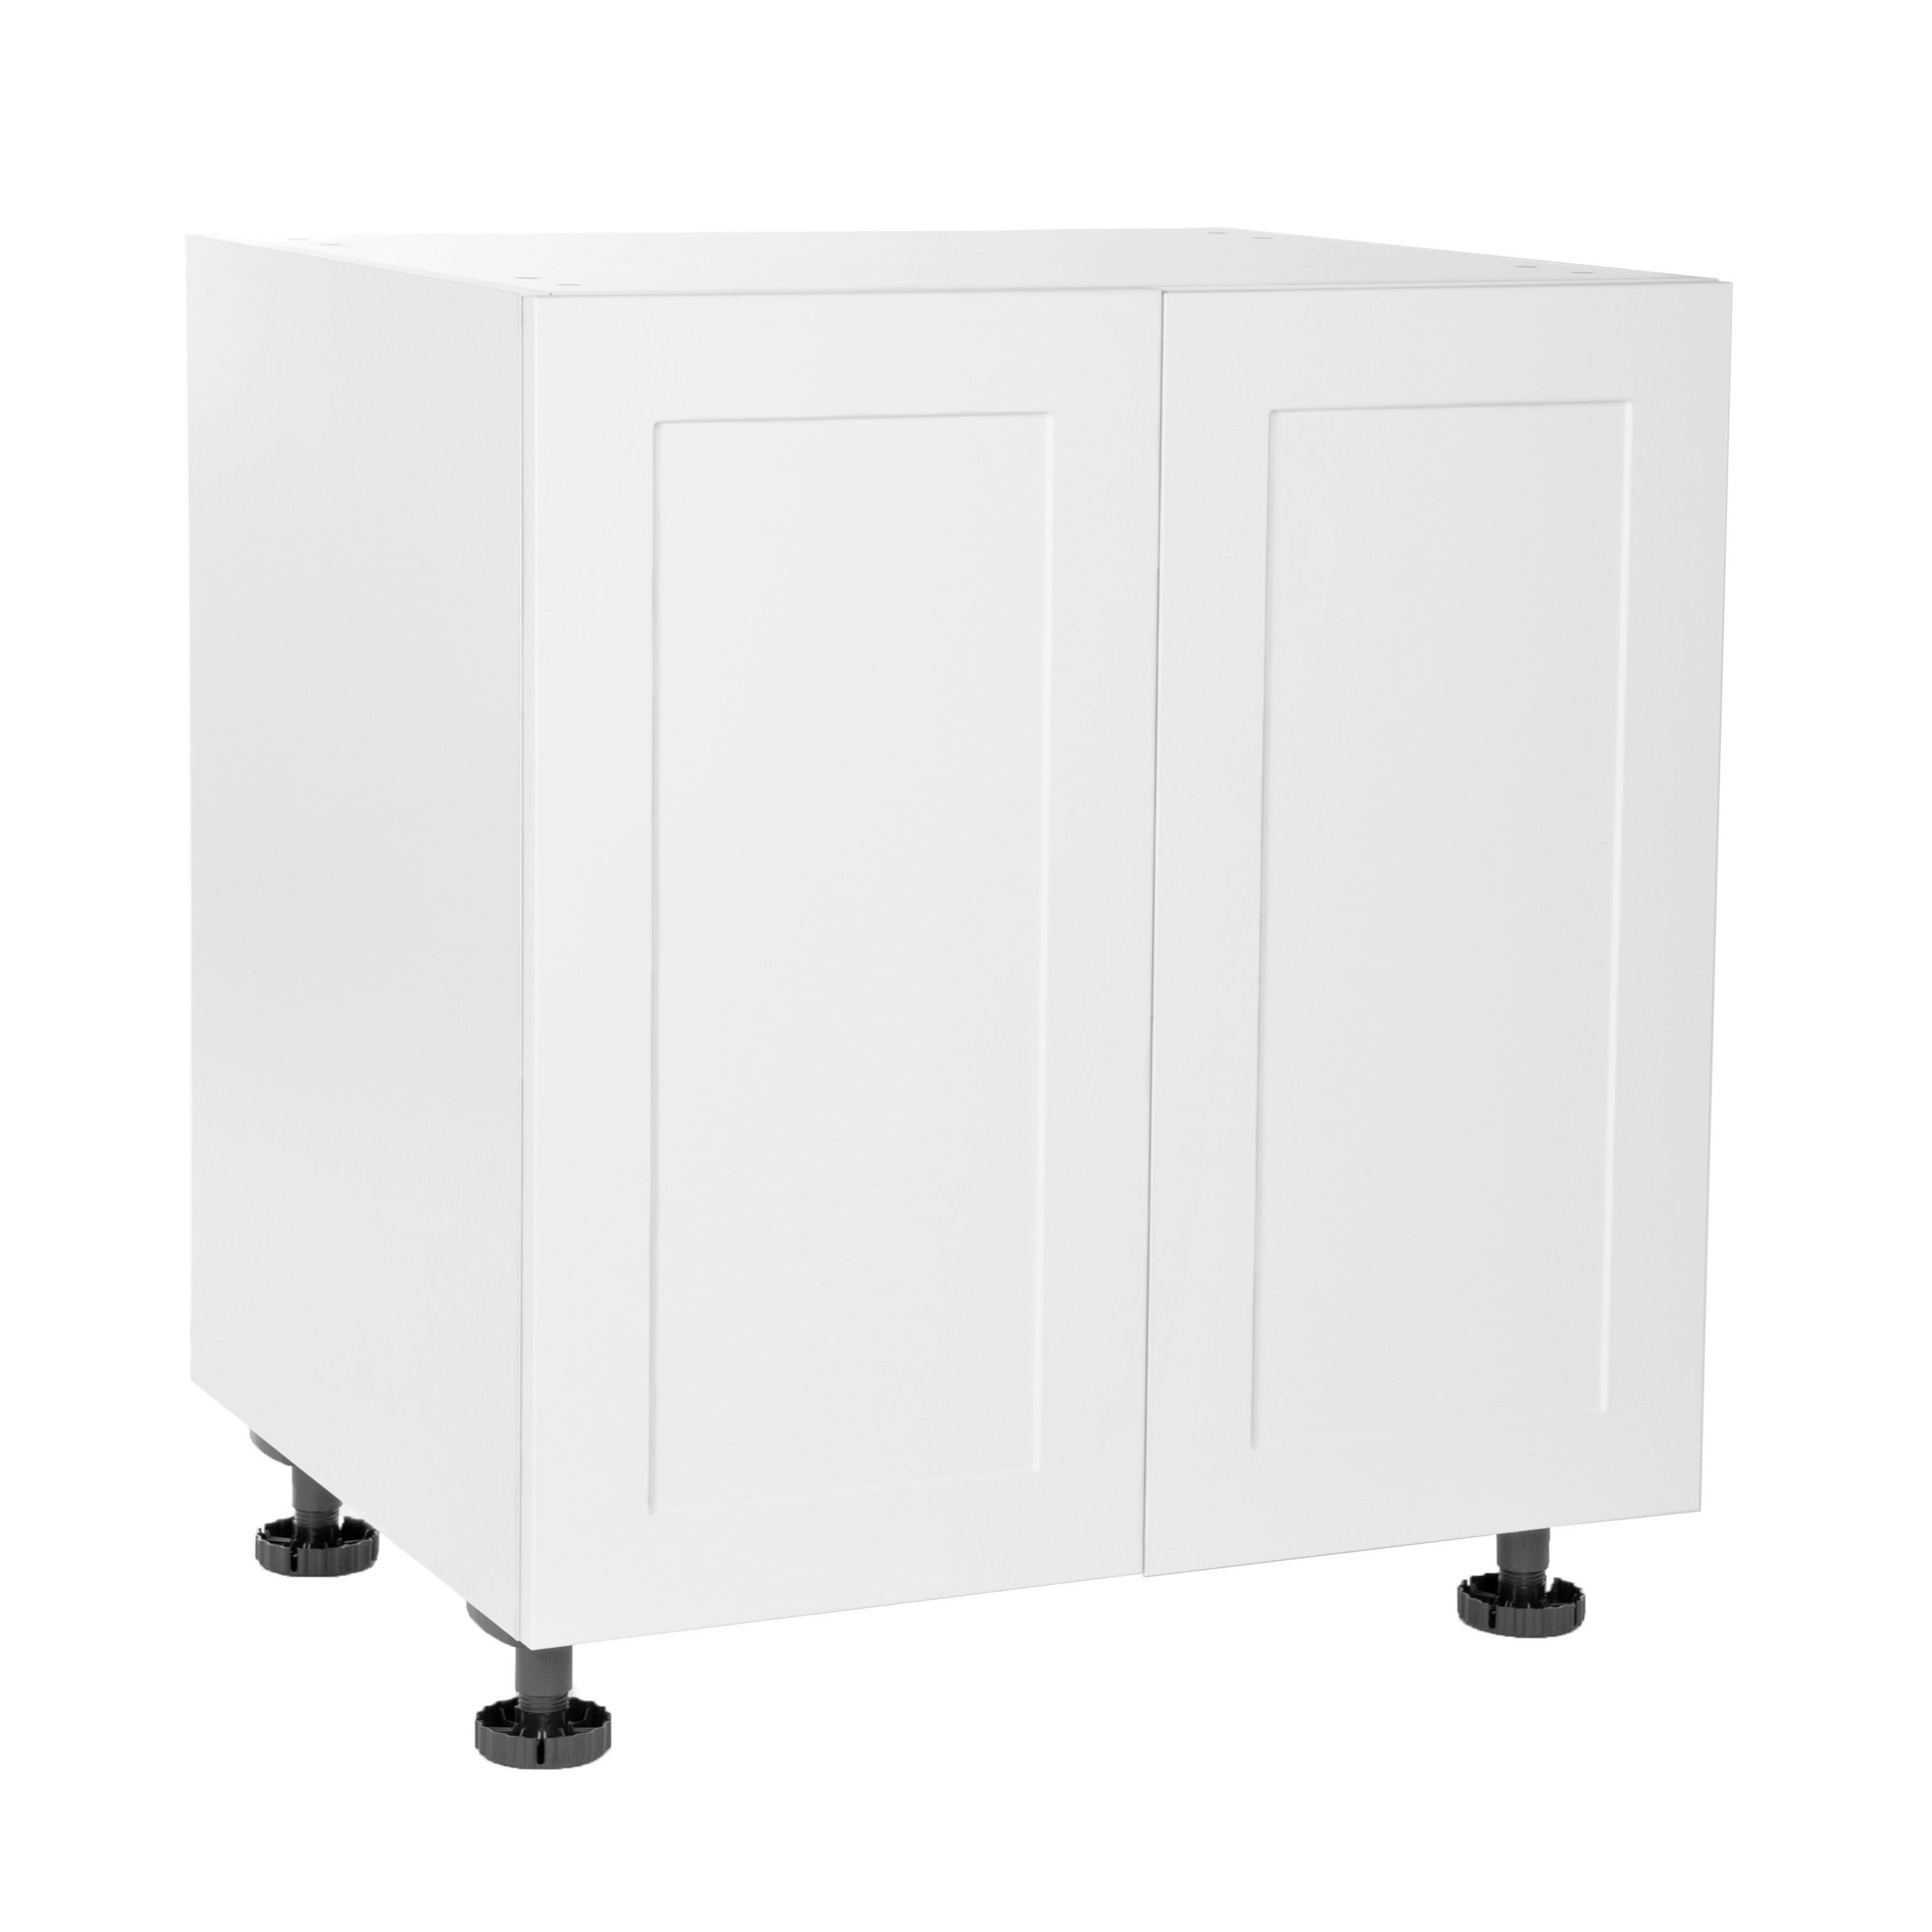 Quick Assemble Modern Style with Soft Close, White Shaker Base Kitchen Cabinet, 2 Door (30 in W x 24 in D x 34.50 in H) -  Pro-Edge HD